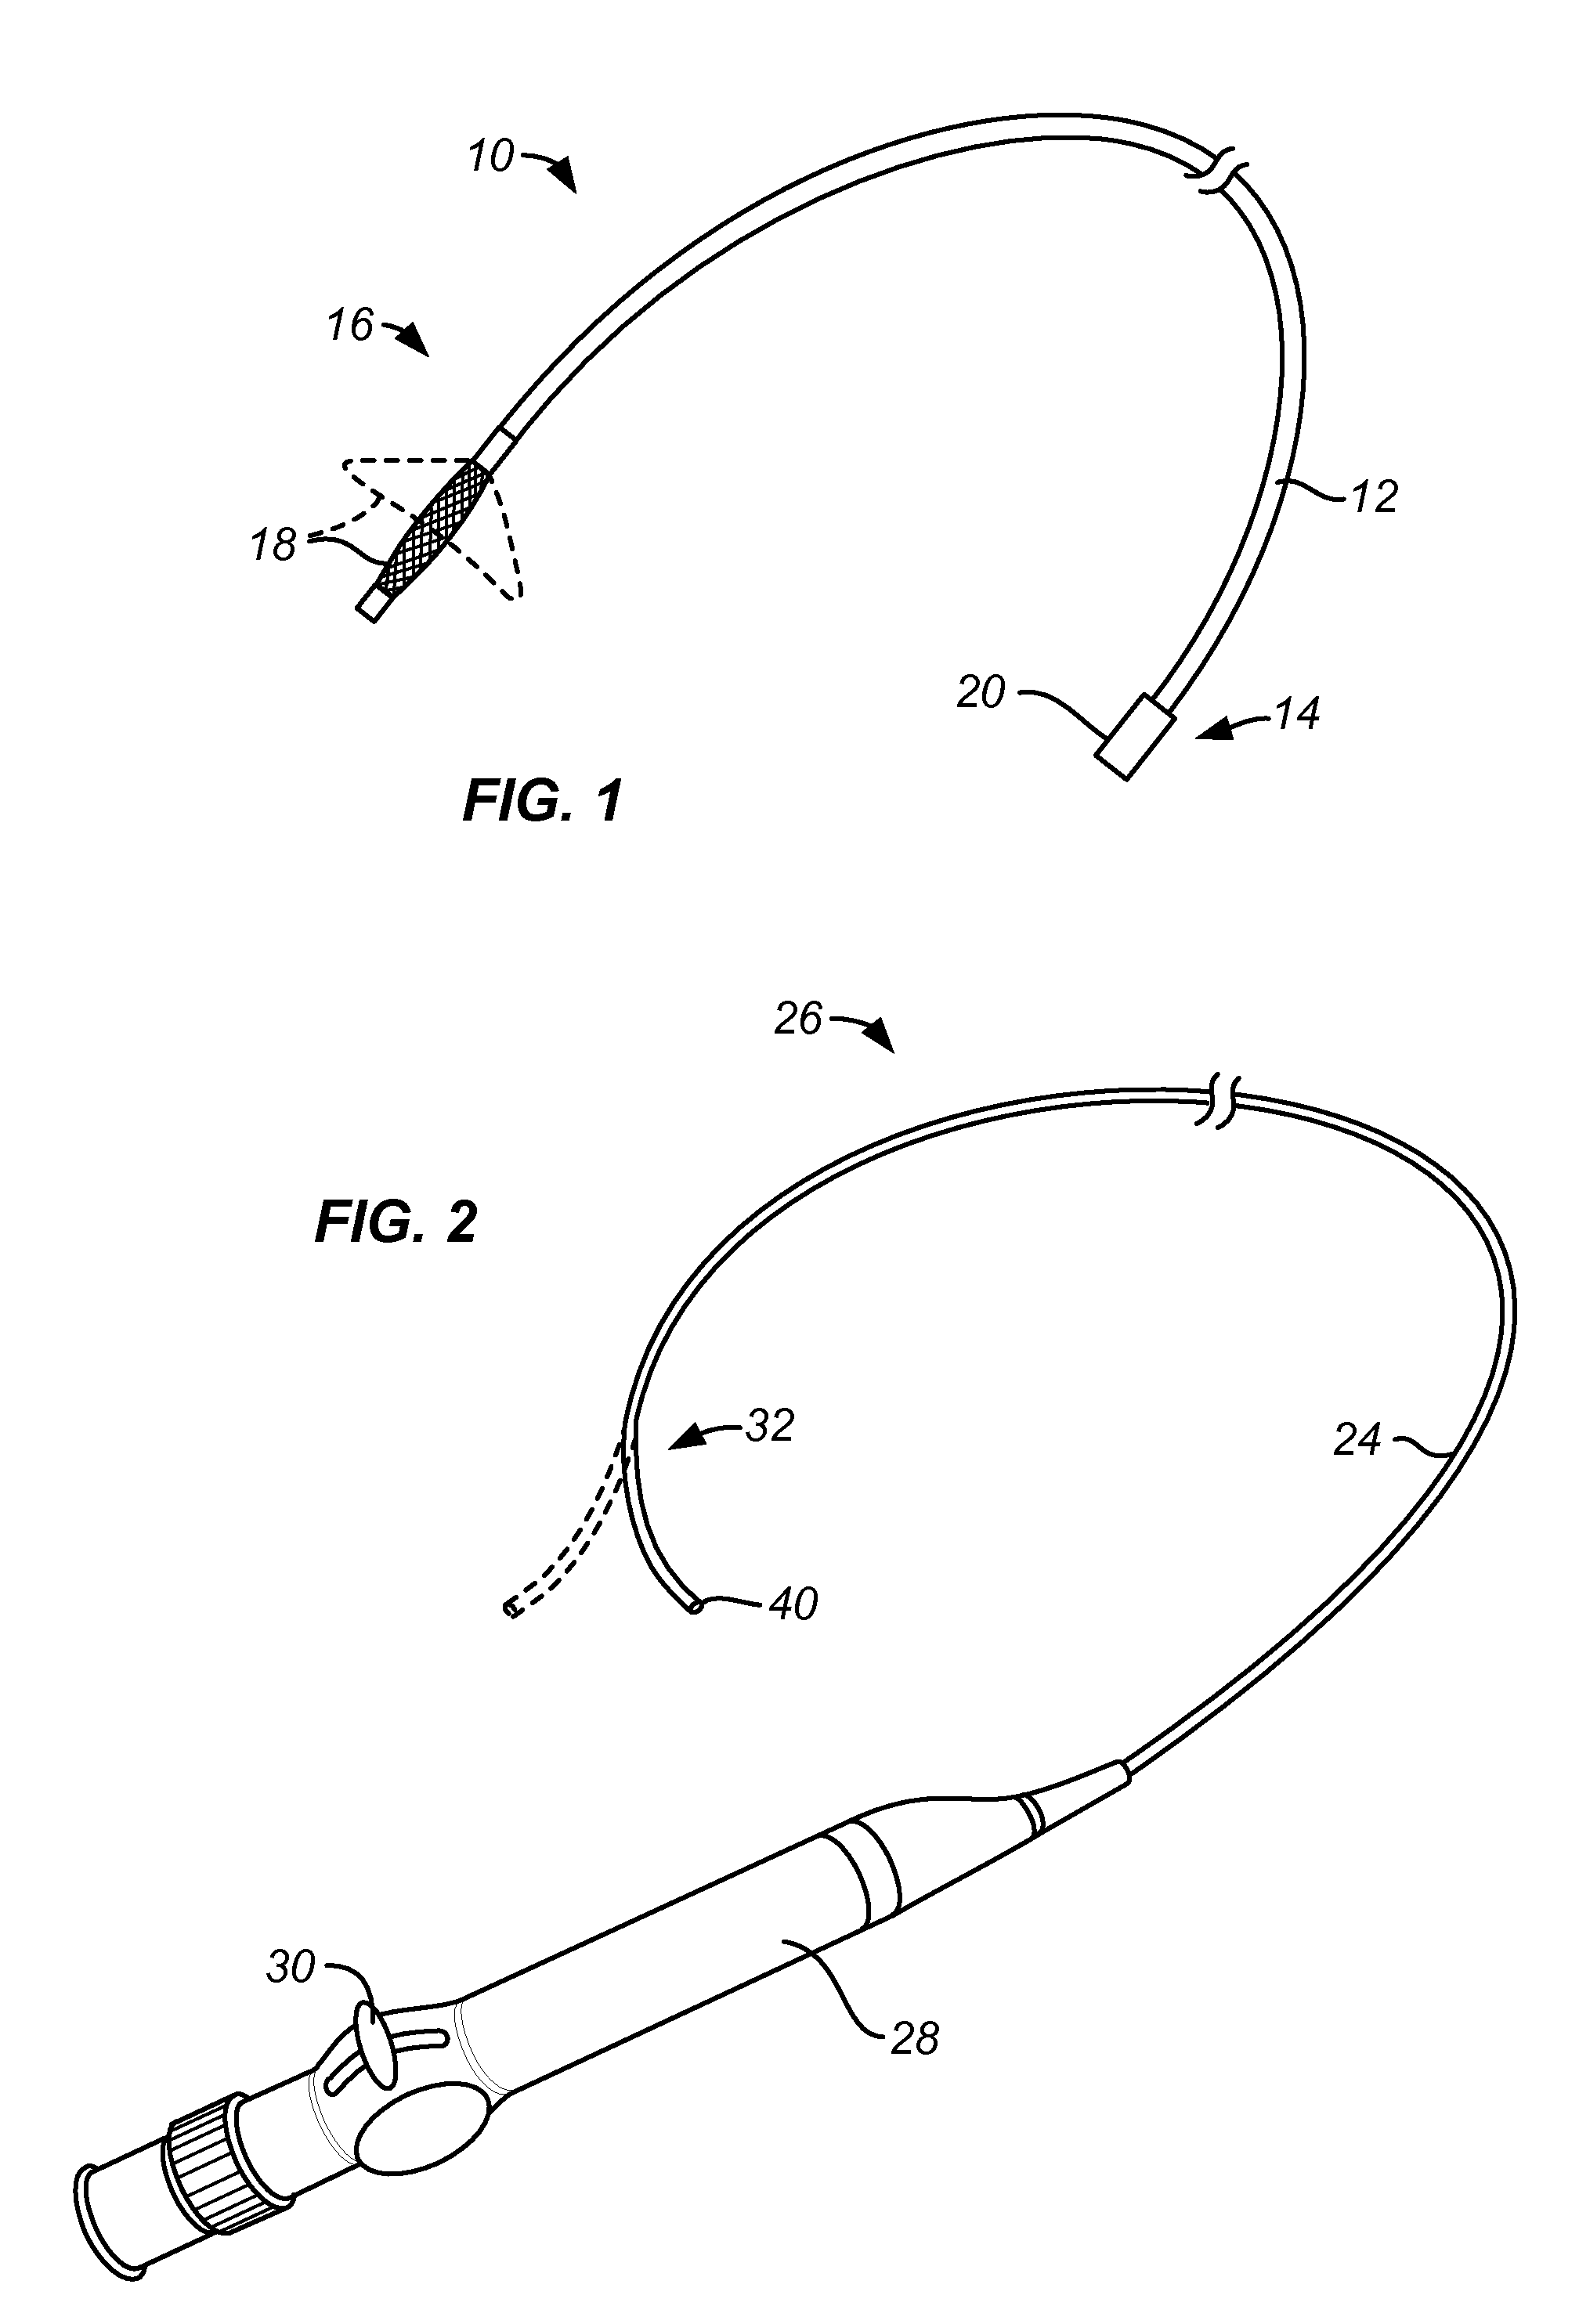 Methods and systems for capturing and removing urinary stones from body cavities